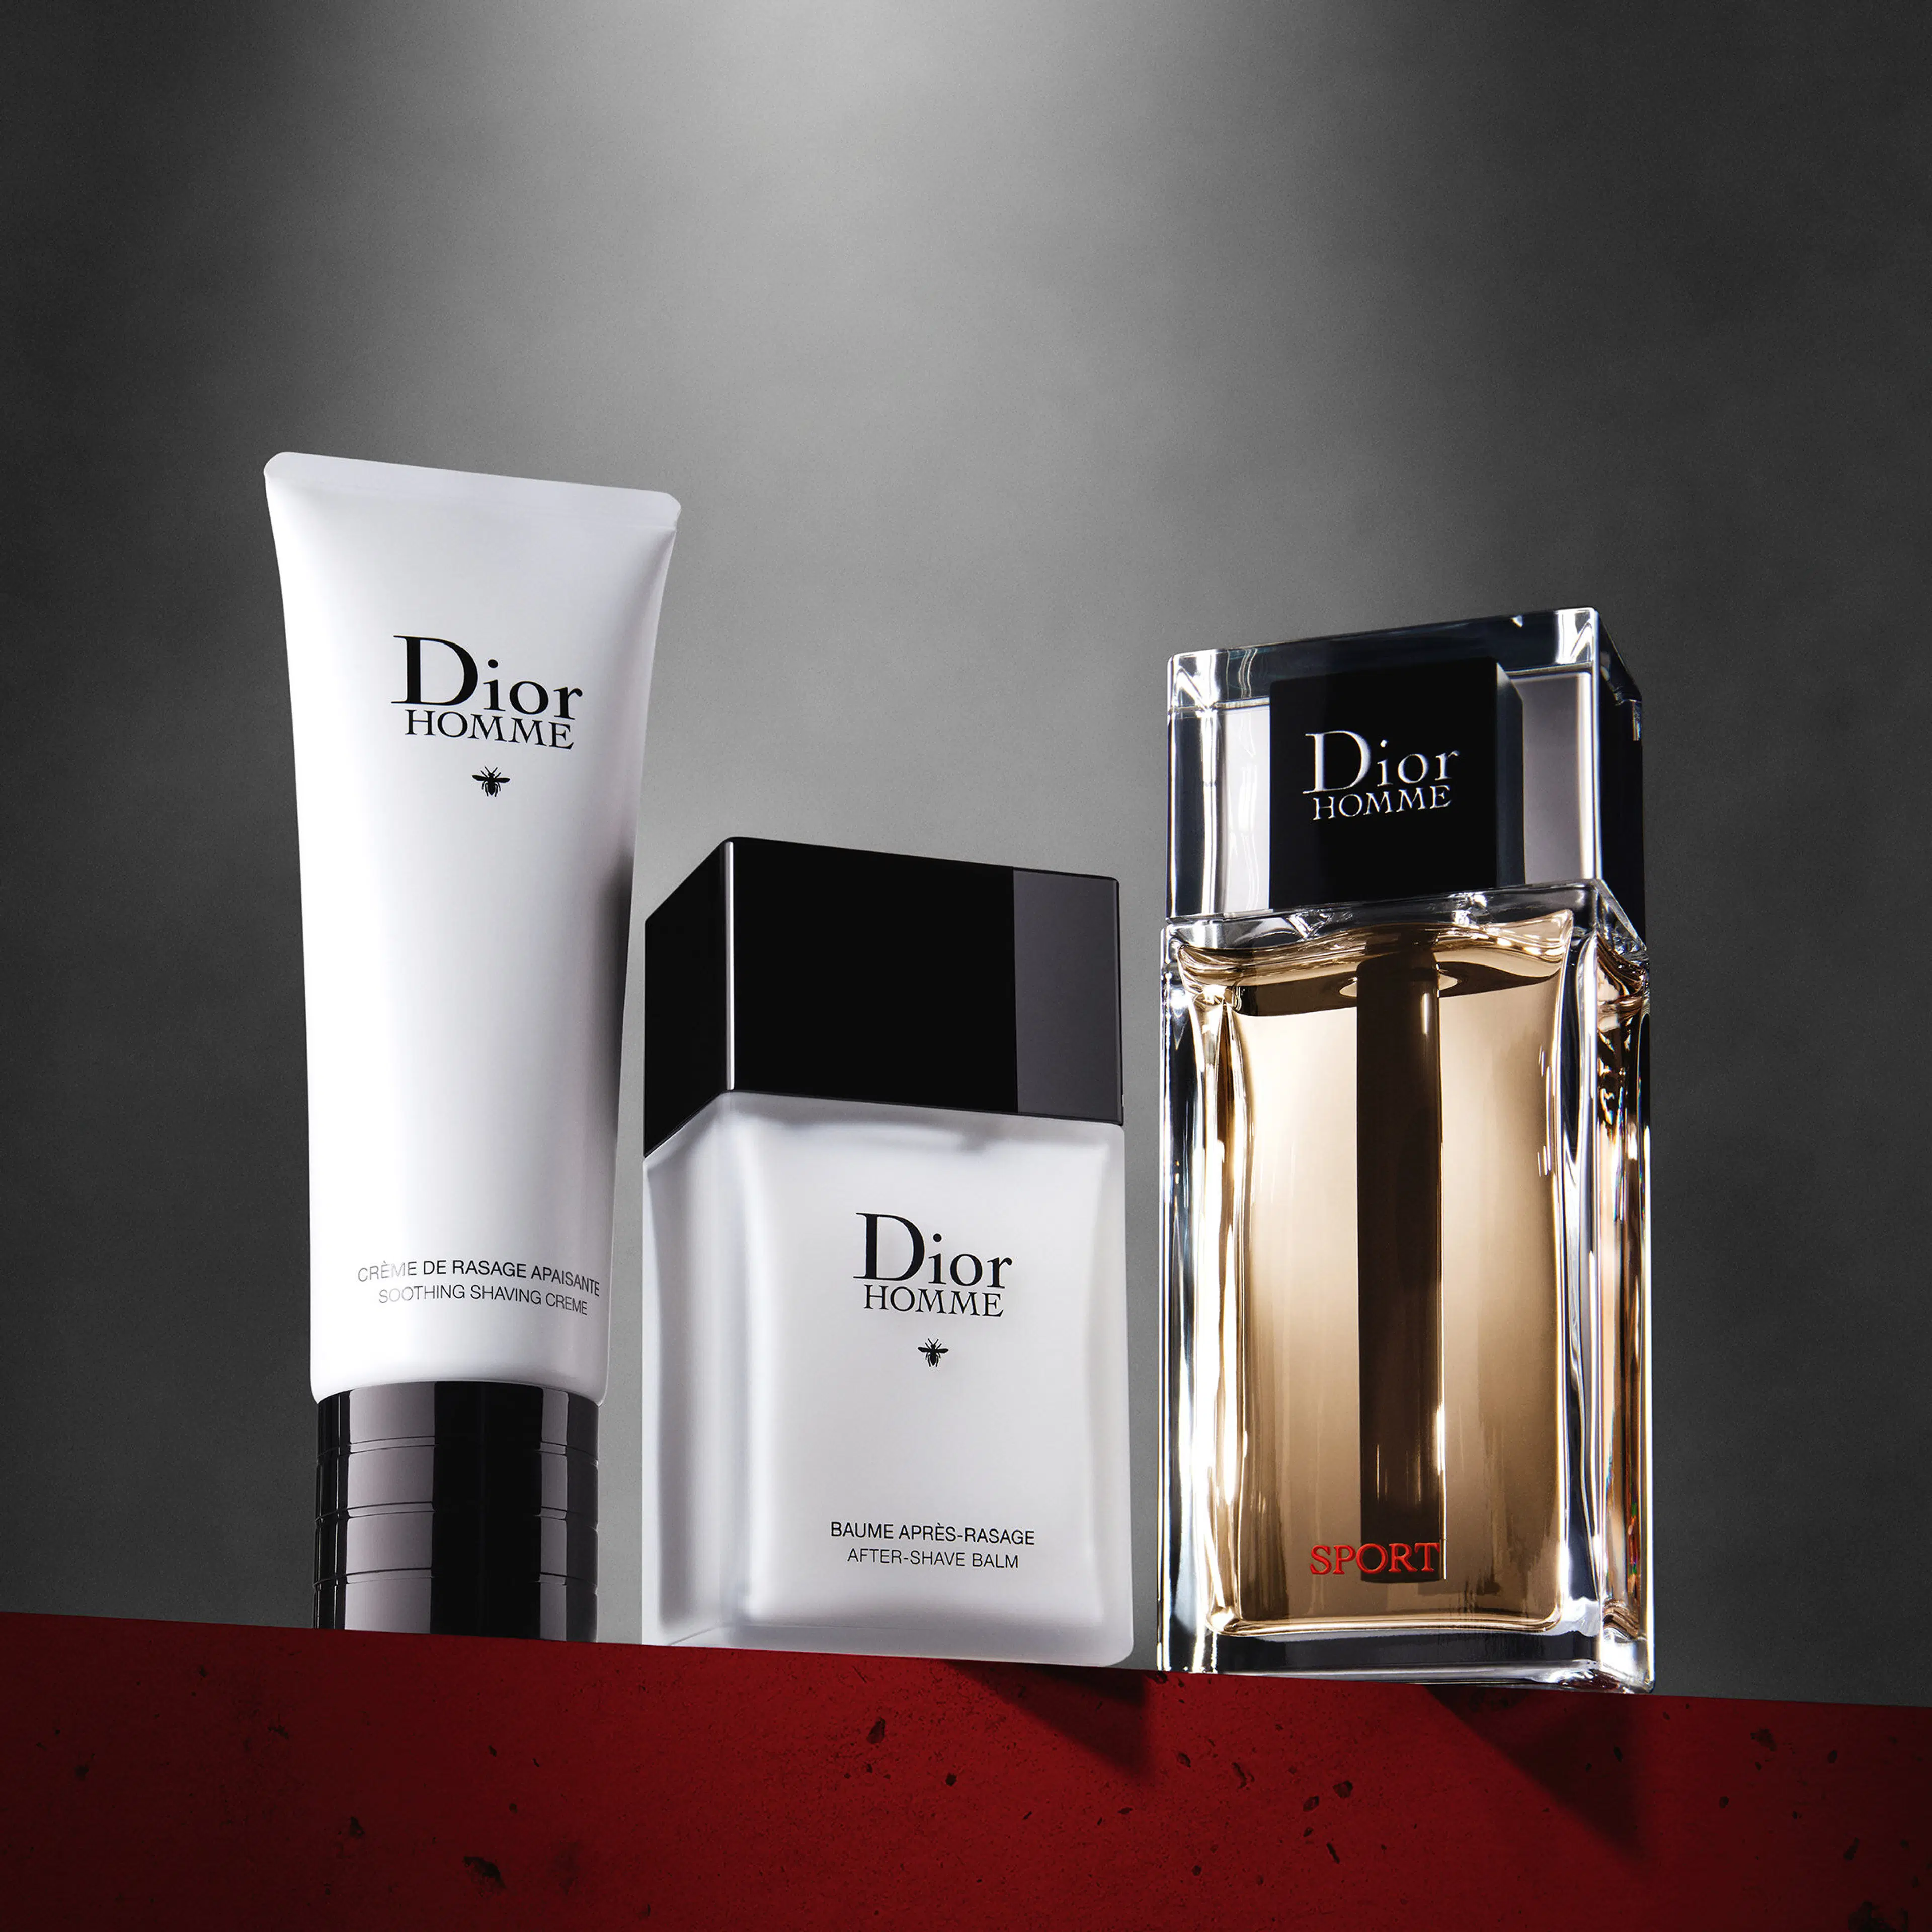 DIOR Homme Soothing Shaving Creme parranajovoide 125 ml